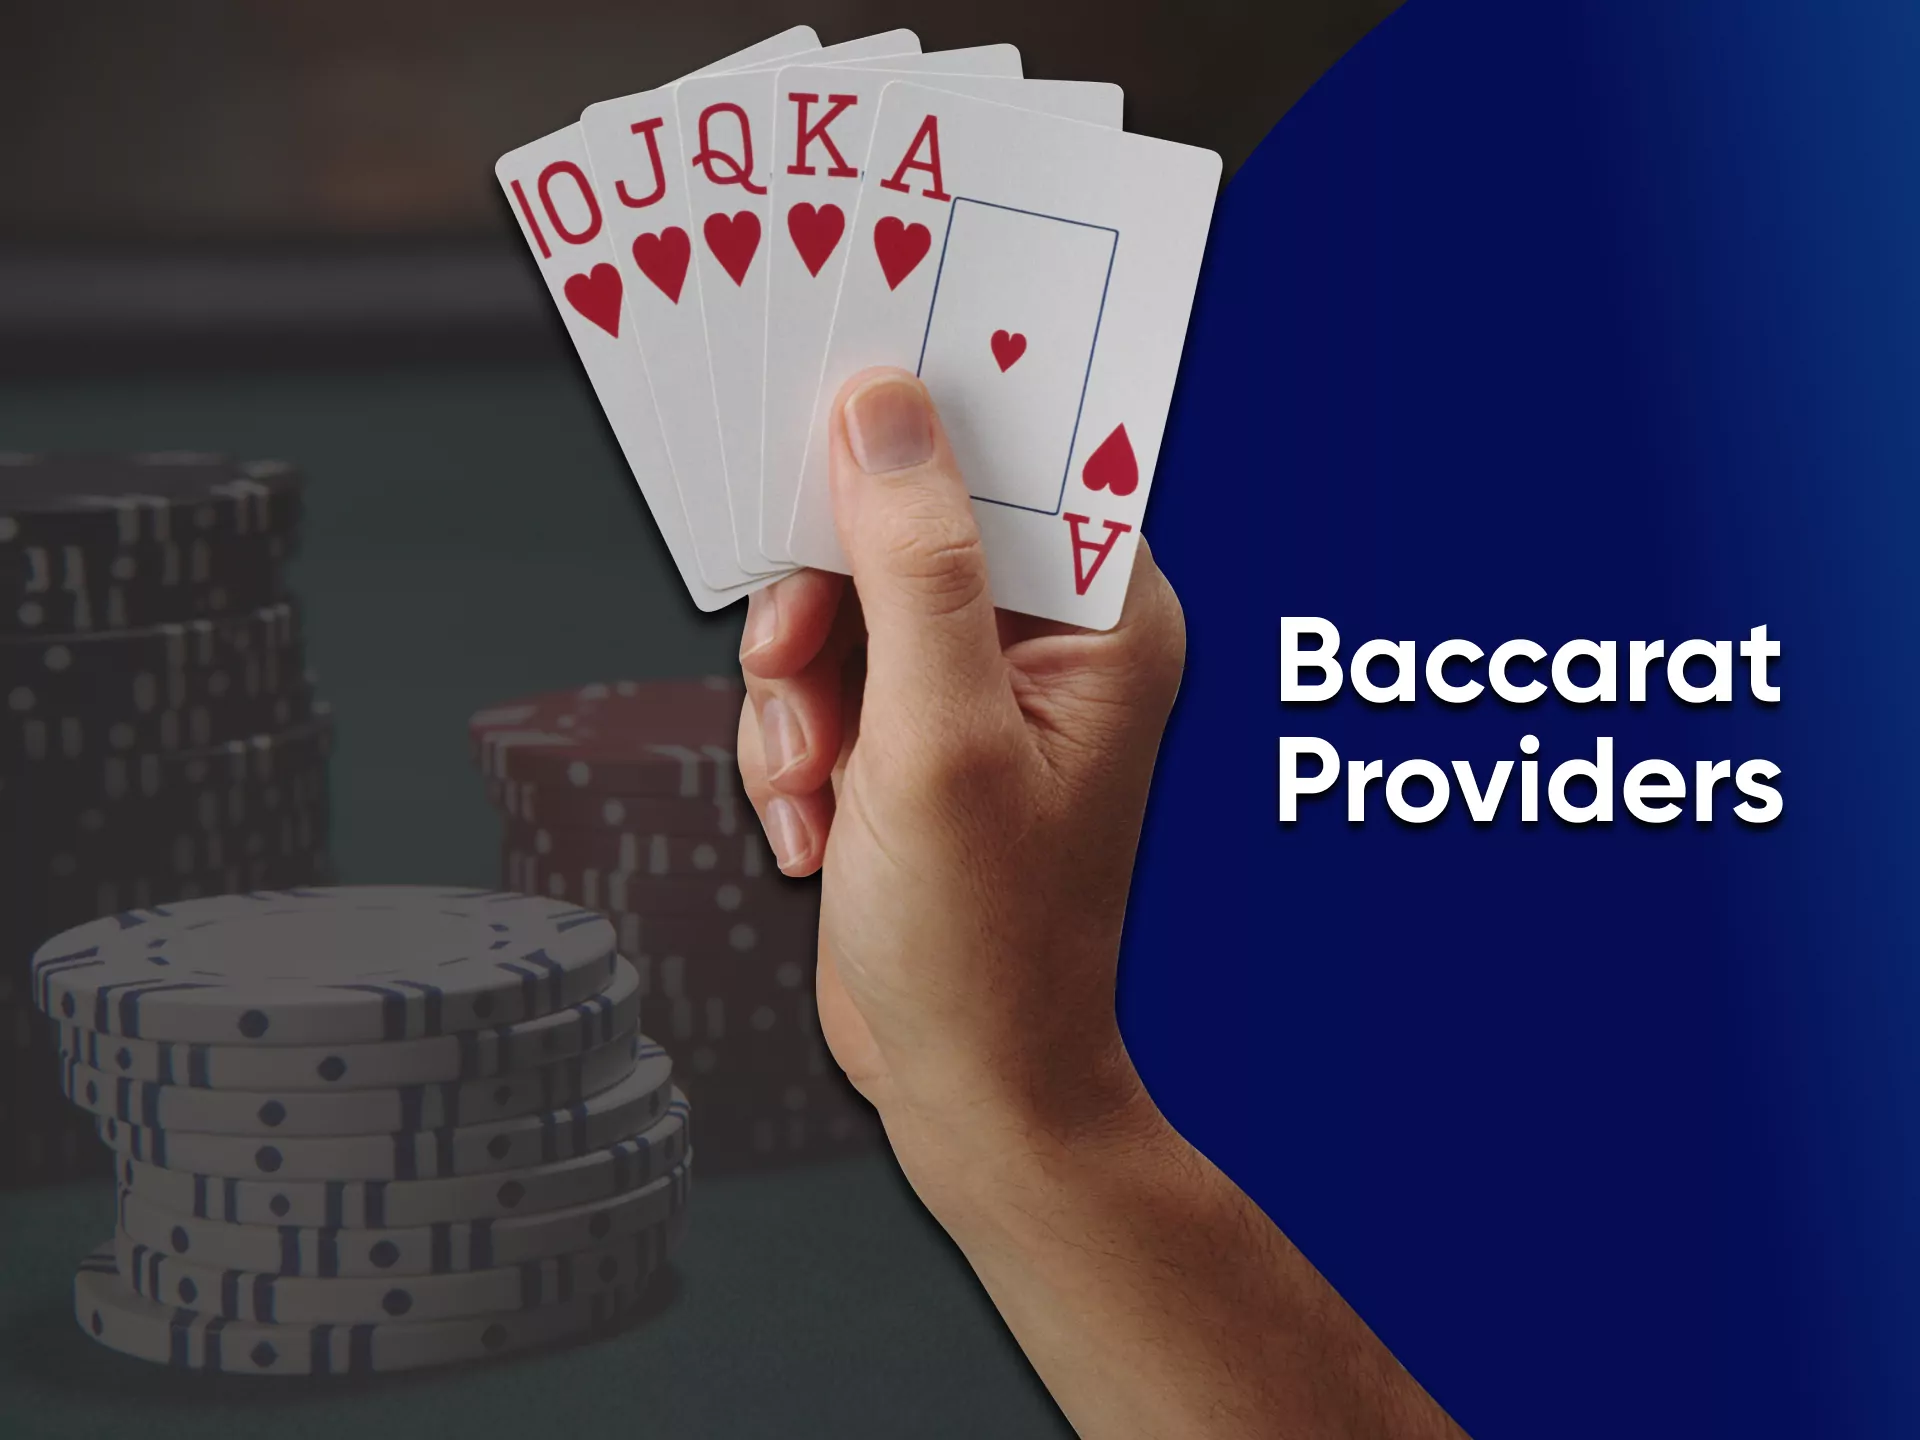 Play Baccarat from trusted sources.